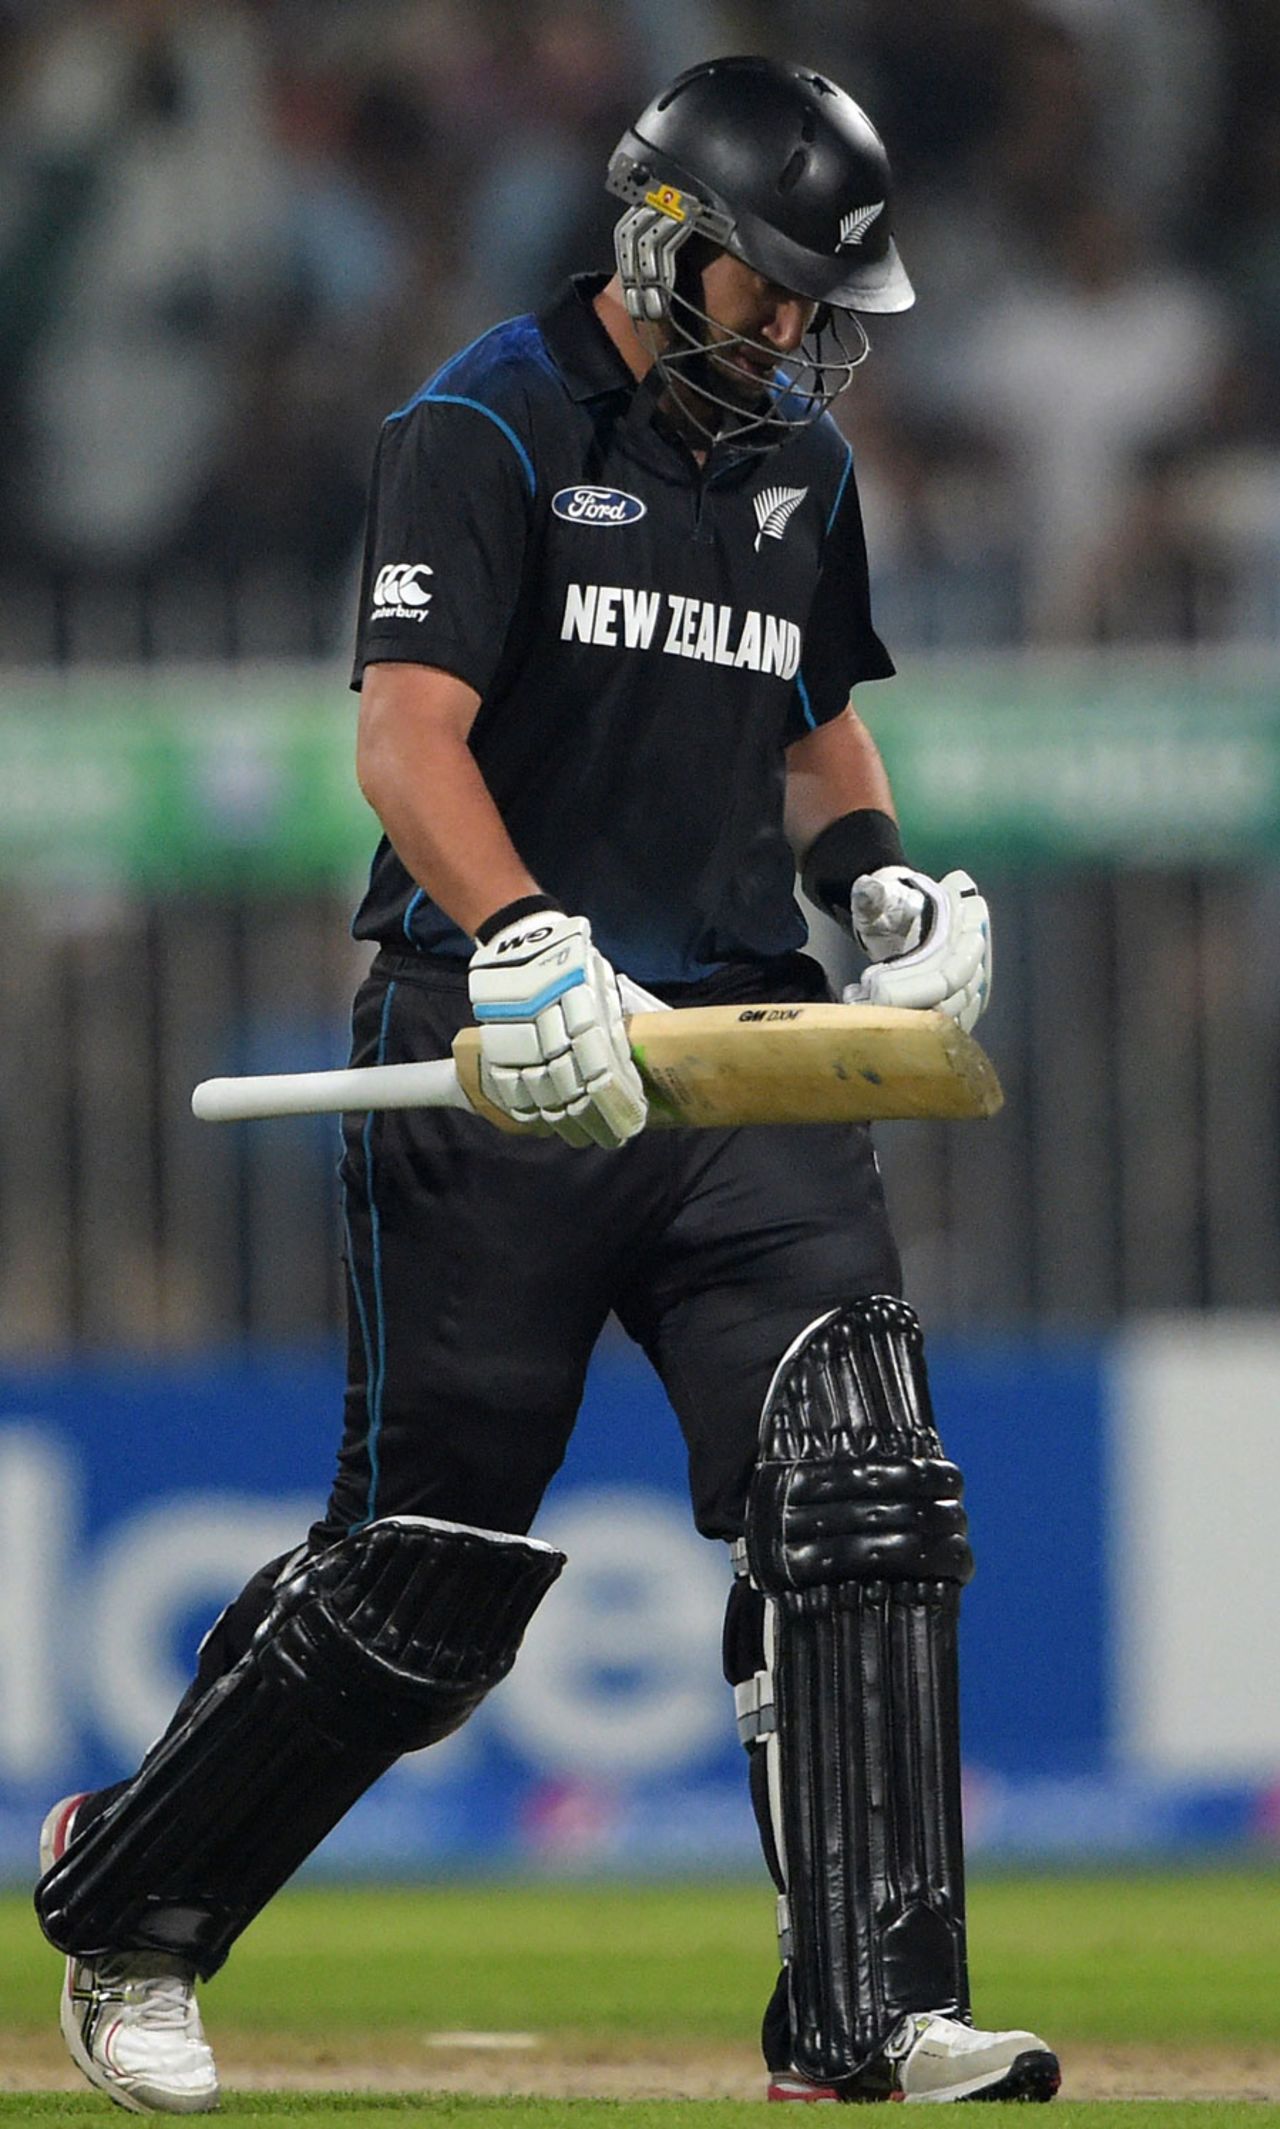 Ross Taylor is disappointed after being caught behind, Pakistan v New Zealand, 2nd ODI, Sharjah, December 12, 2014